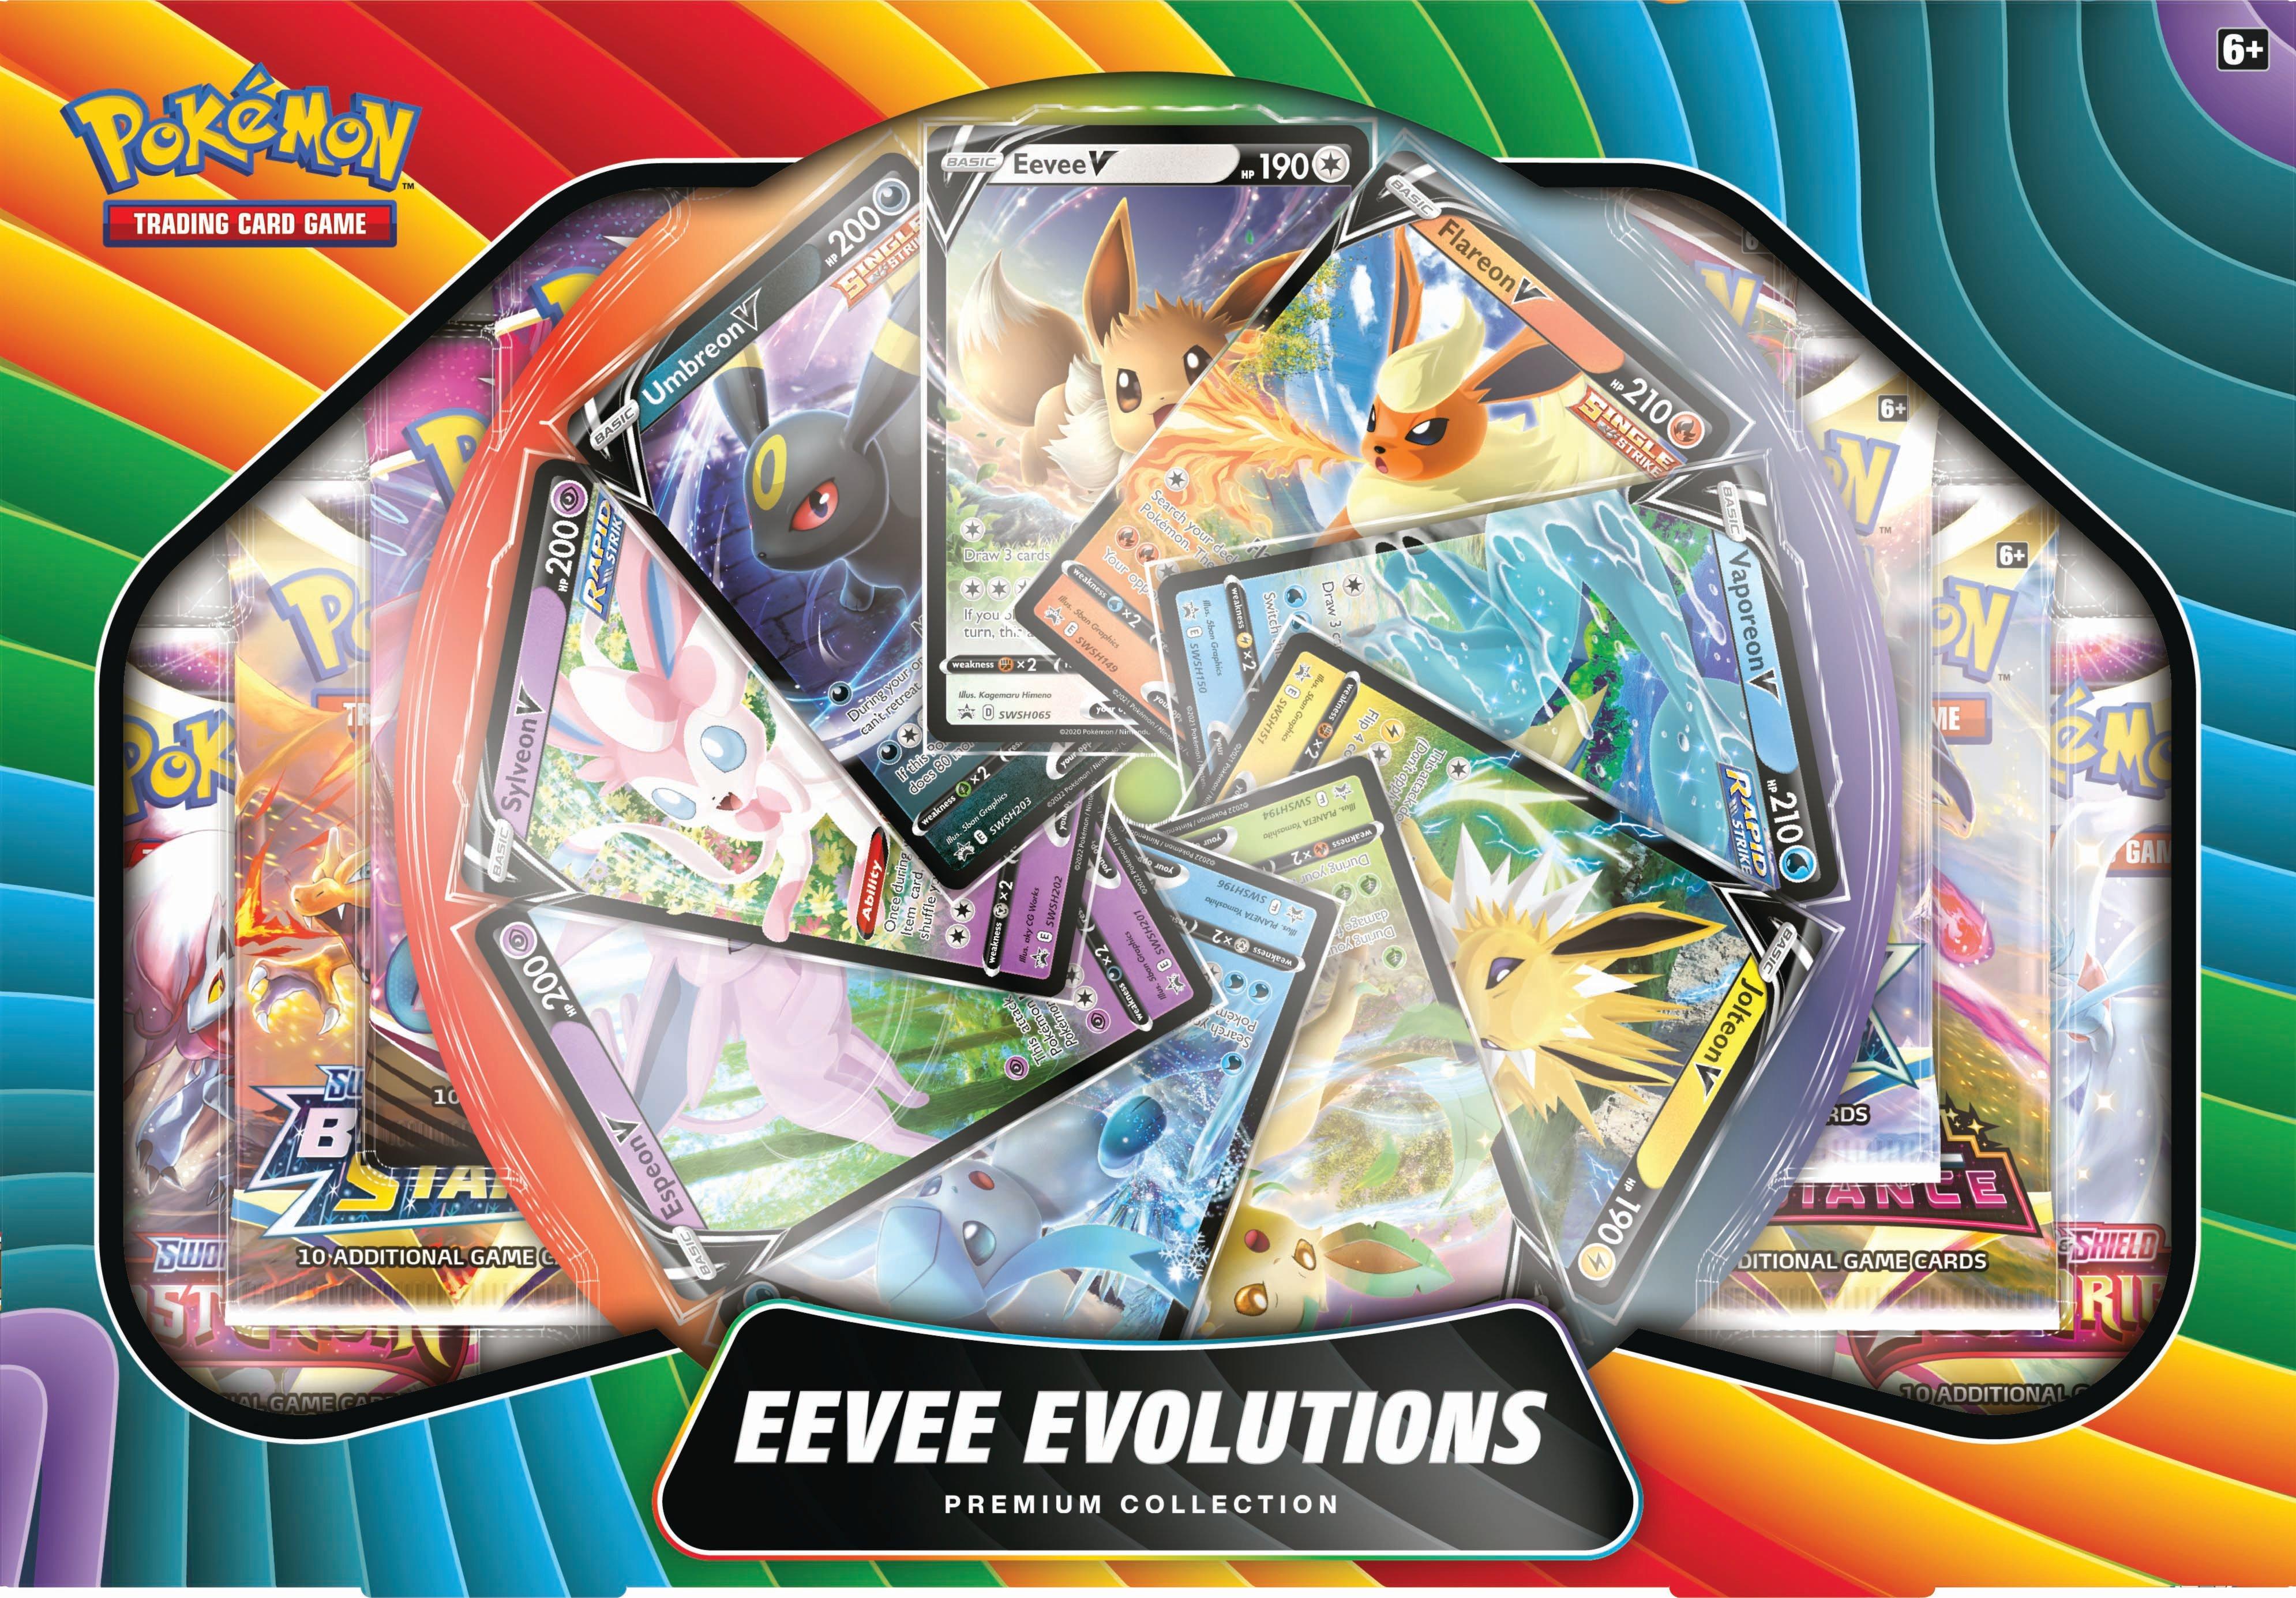 While Eeveelution alt arts are cool, I like these : r/PokemonTCG